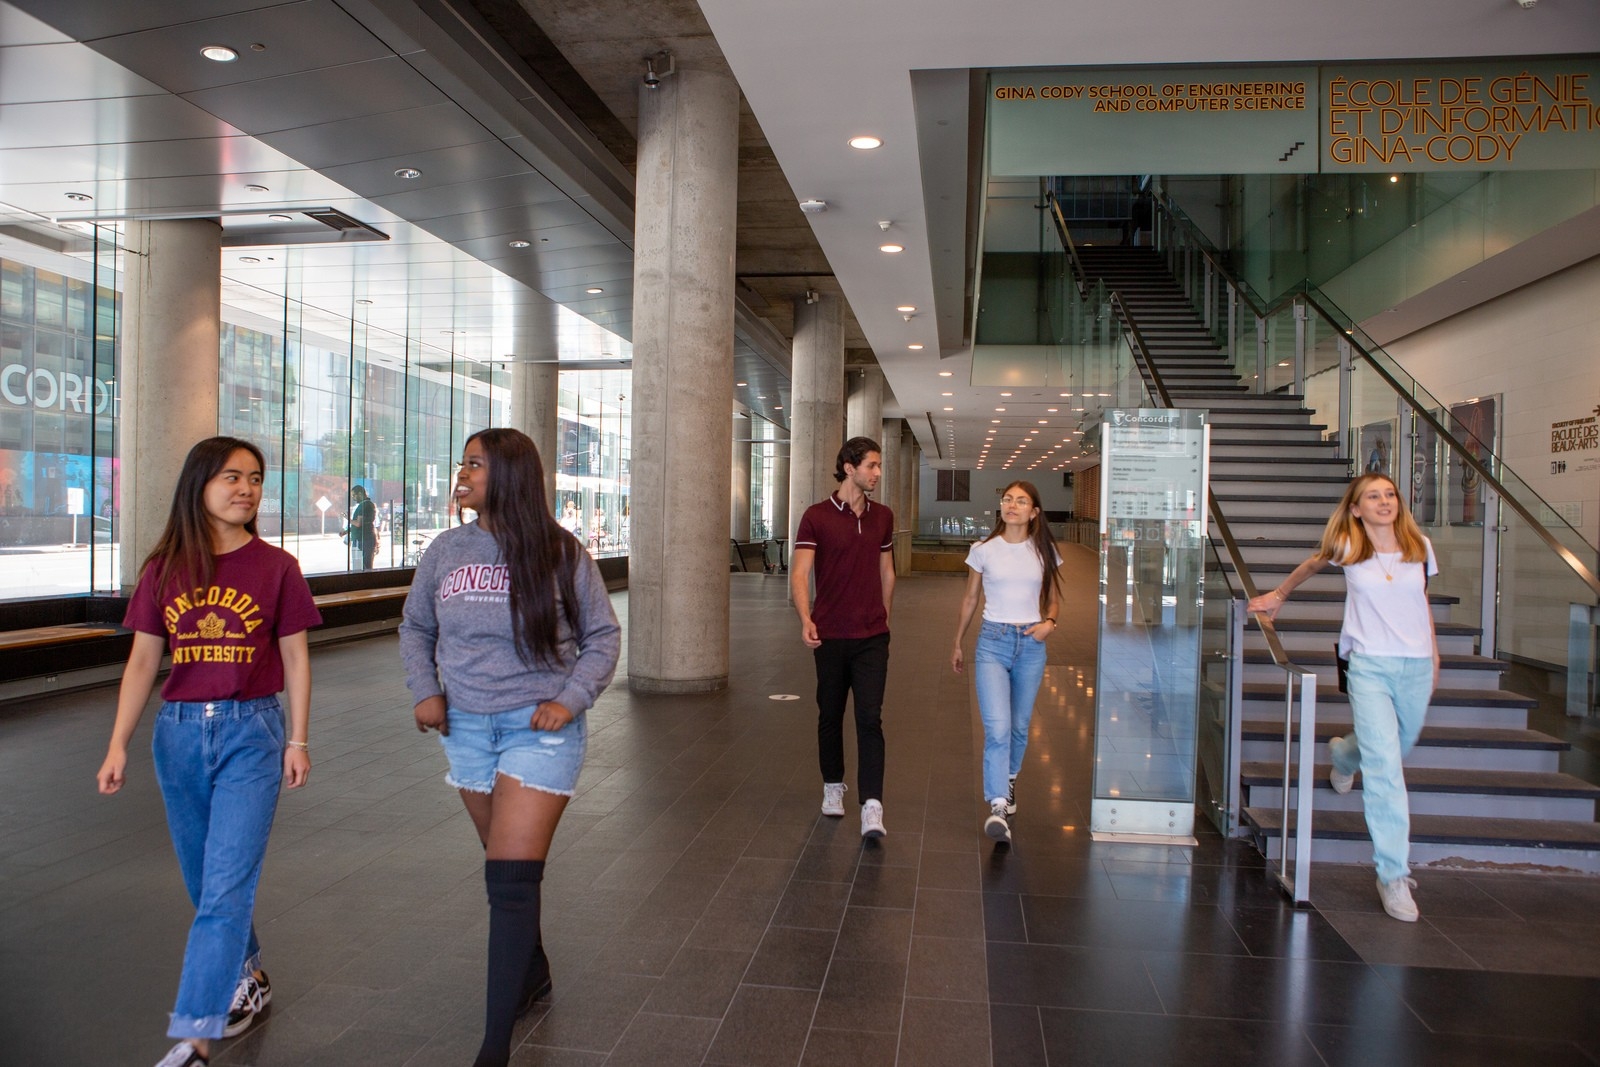 Students walking through the lobby of the Engineering complex